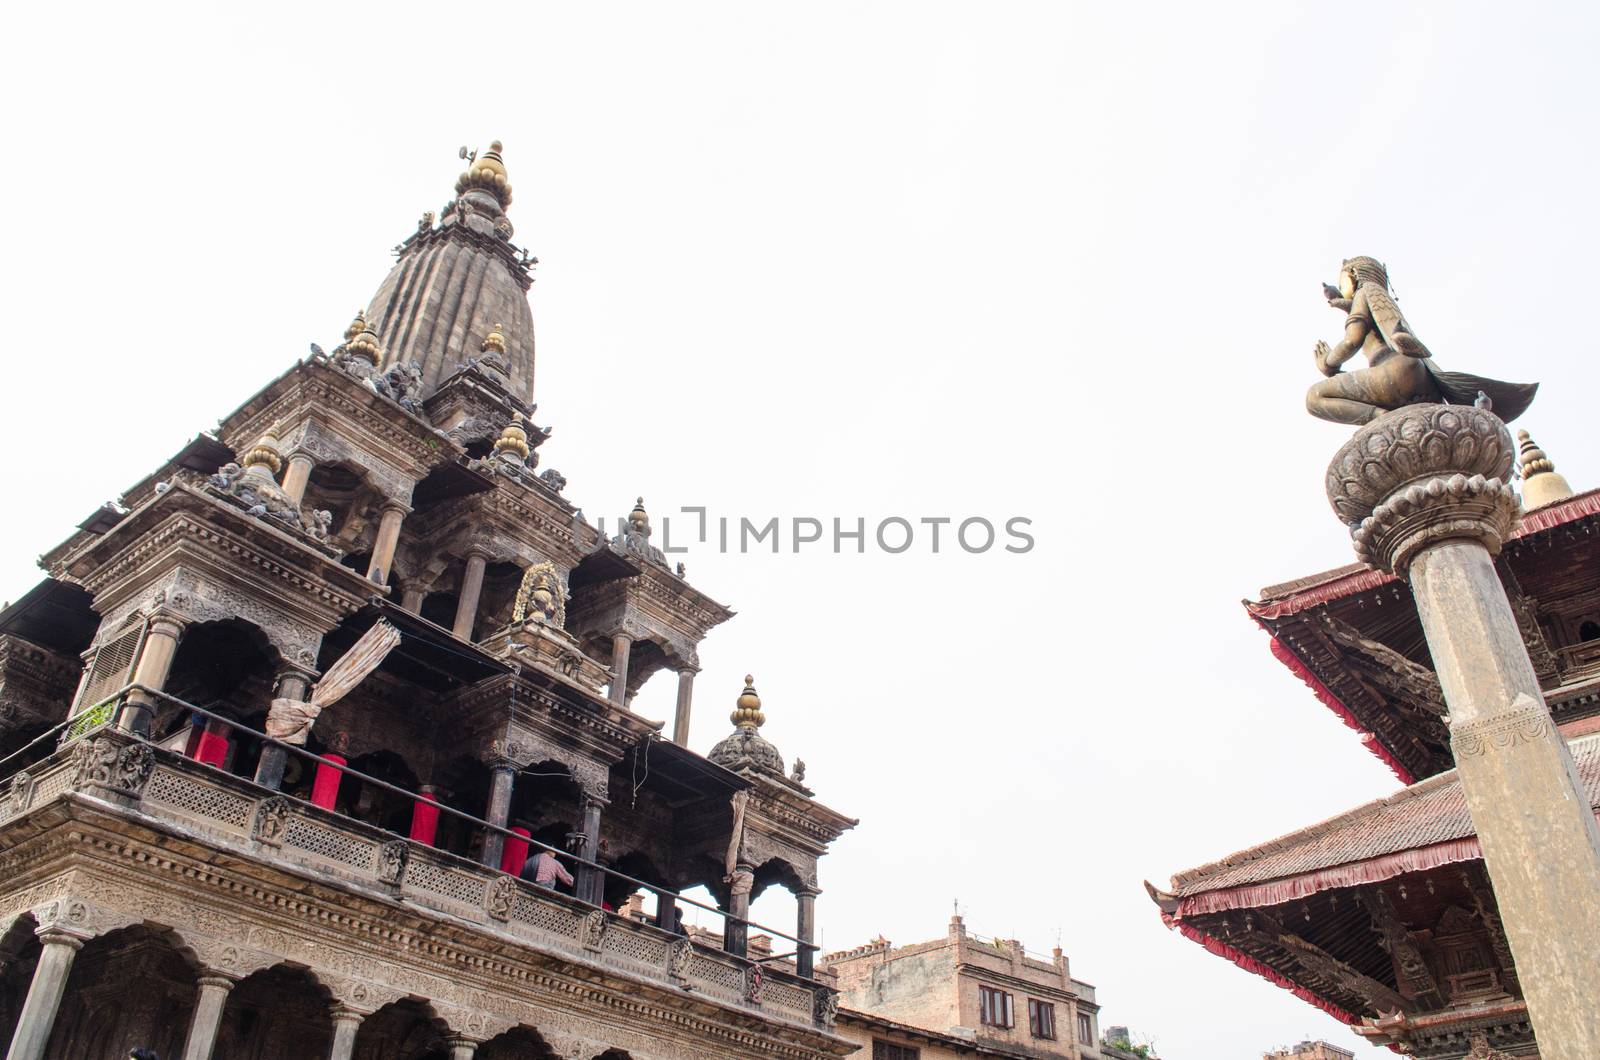 NEPAL-Patan Durbar Square one of the main sights of the Kathmand by visanuwit